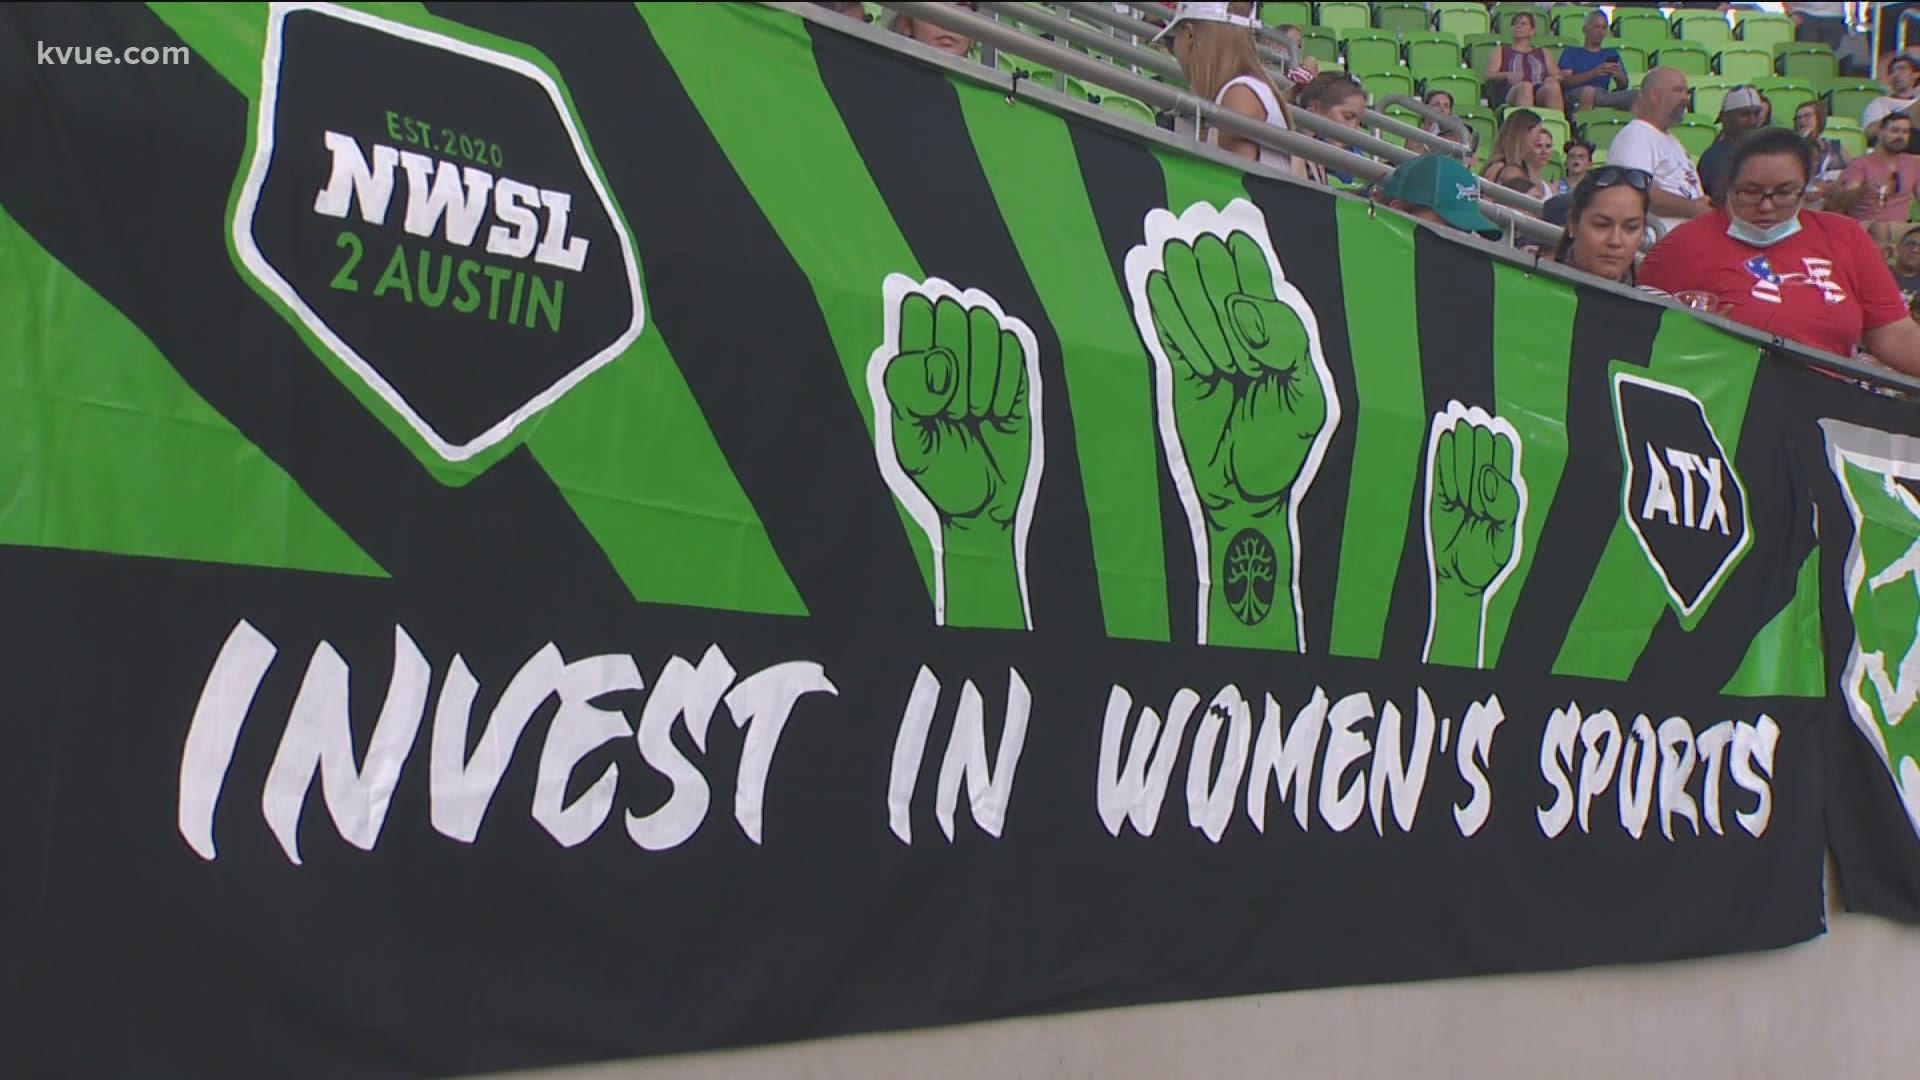 It was an emotional night for a lot of Austinites at Q2 Stadium. KVUE heard from local soccer fans about how monumental the USWNT match was for them.